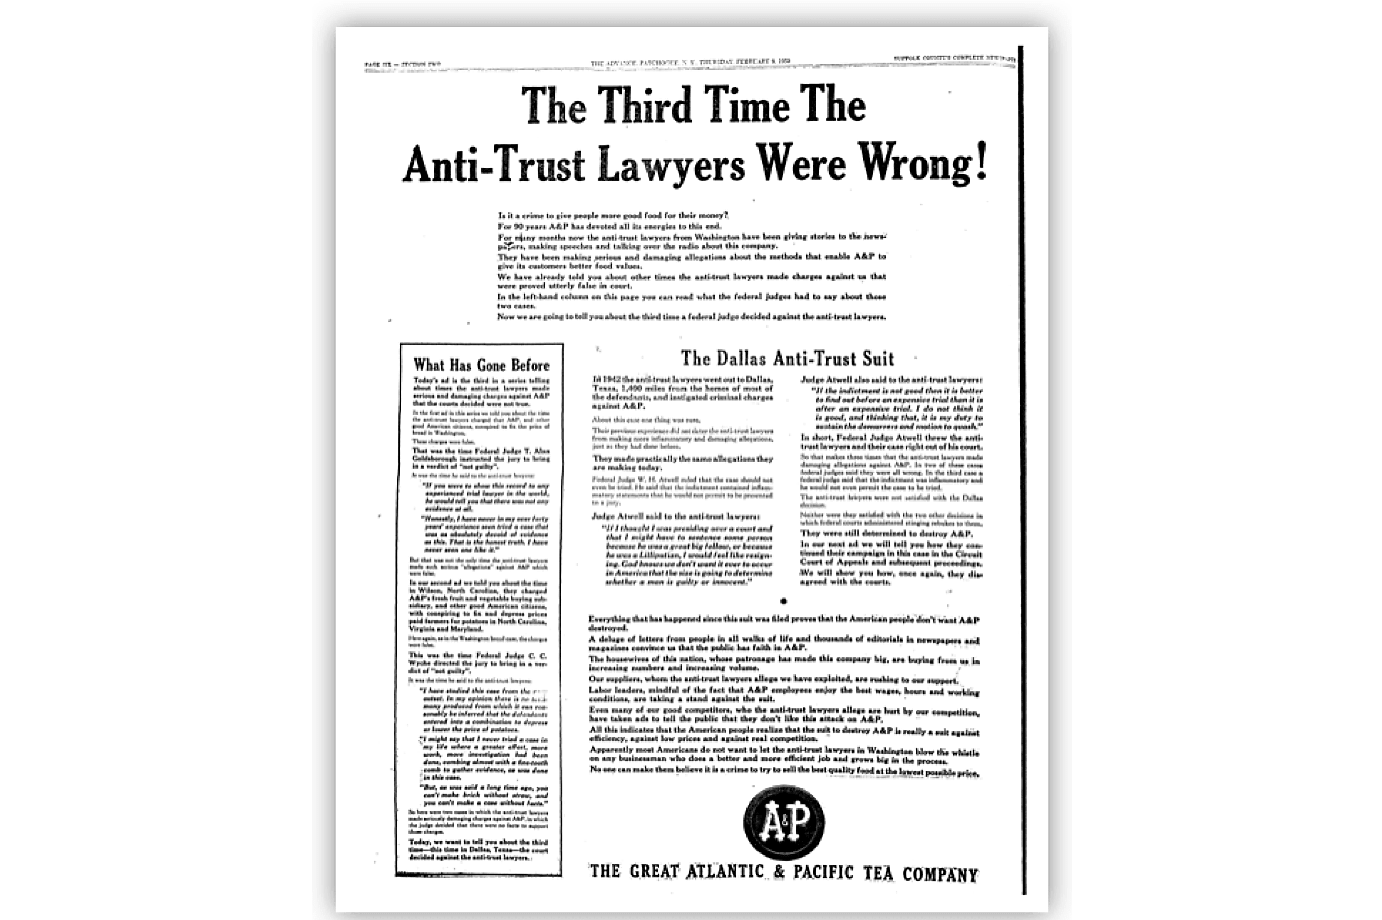 "The Third Time the Anti-Trust Lawyers Were Wrong!" Ad